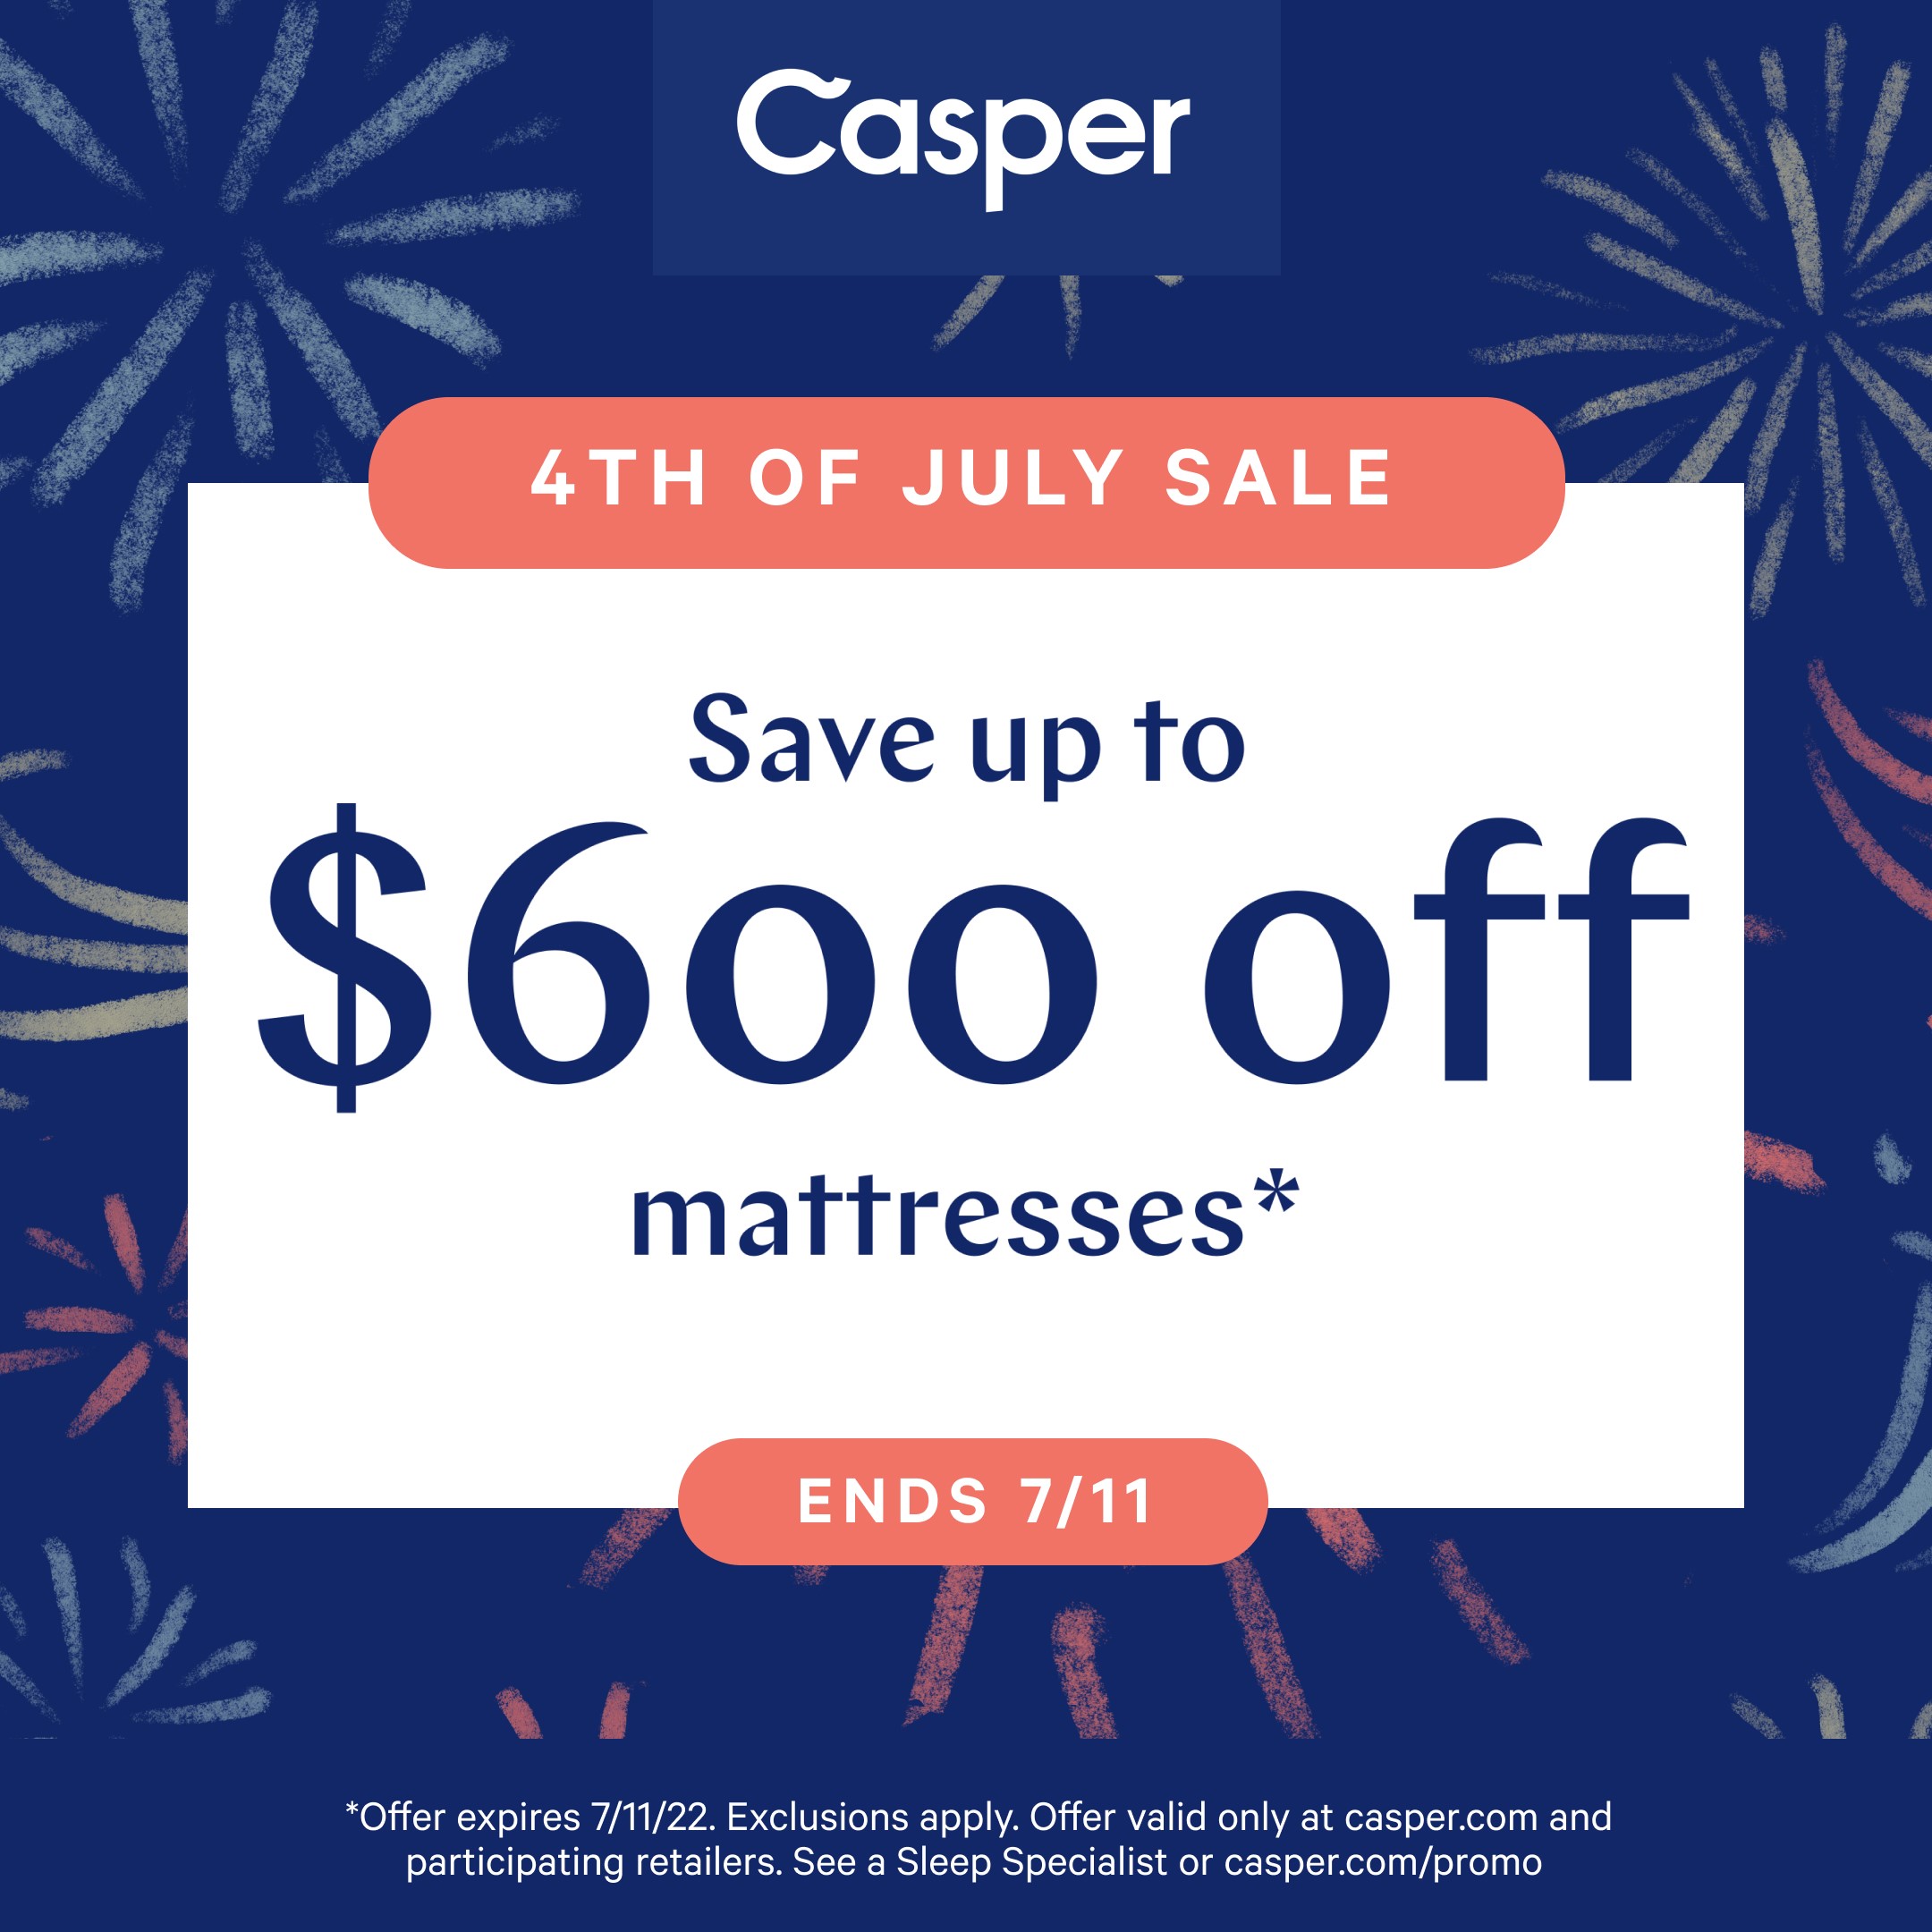 The biggest bang for your buck: Casper's 4th of July Sale! from Casper